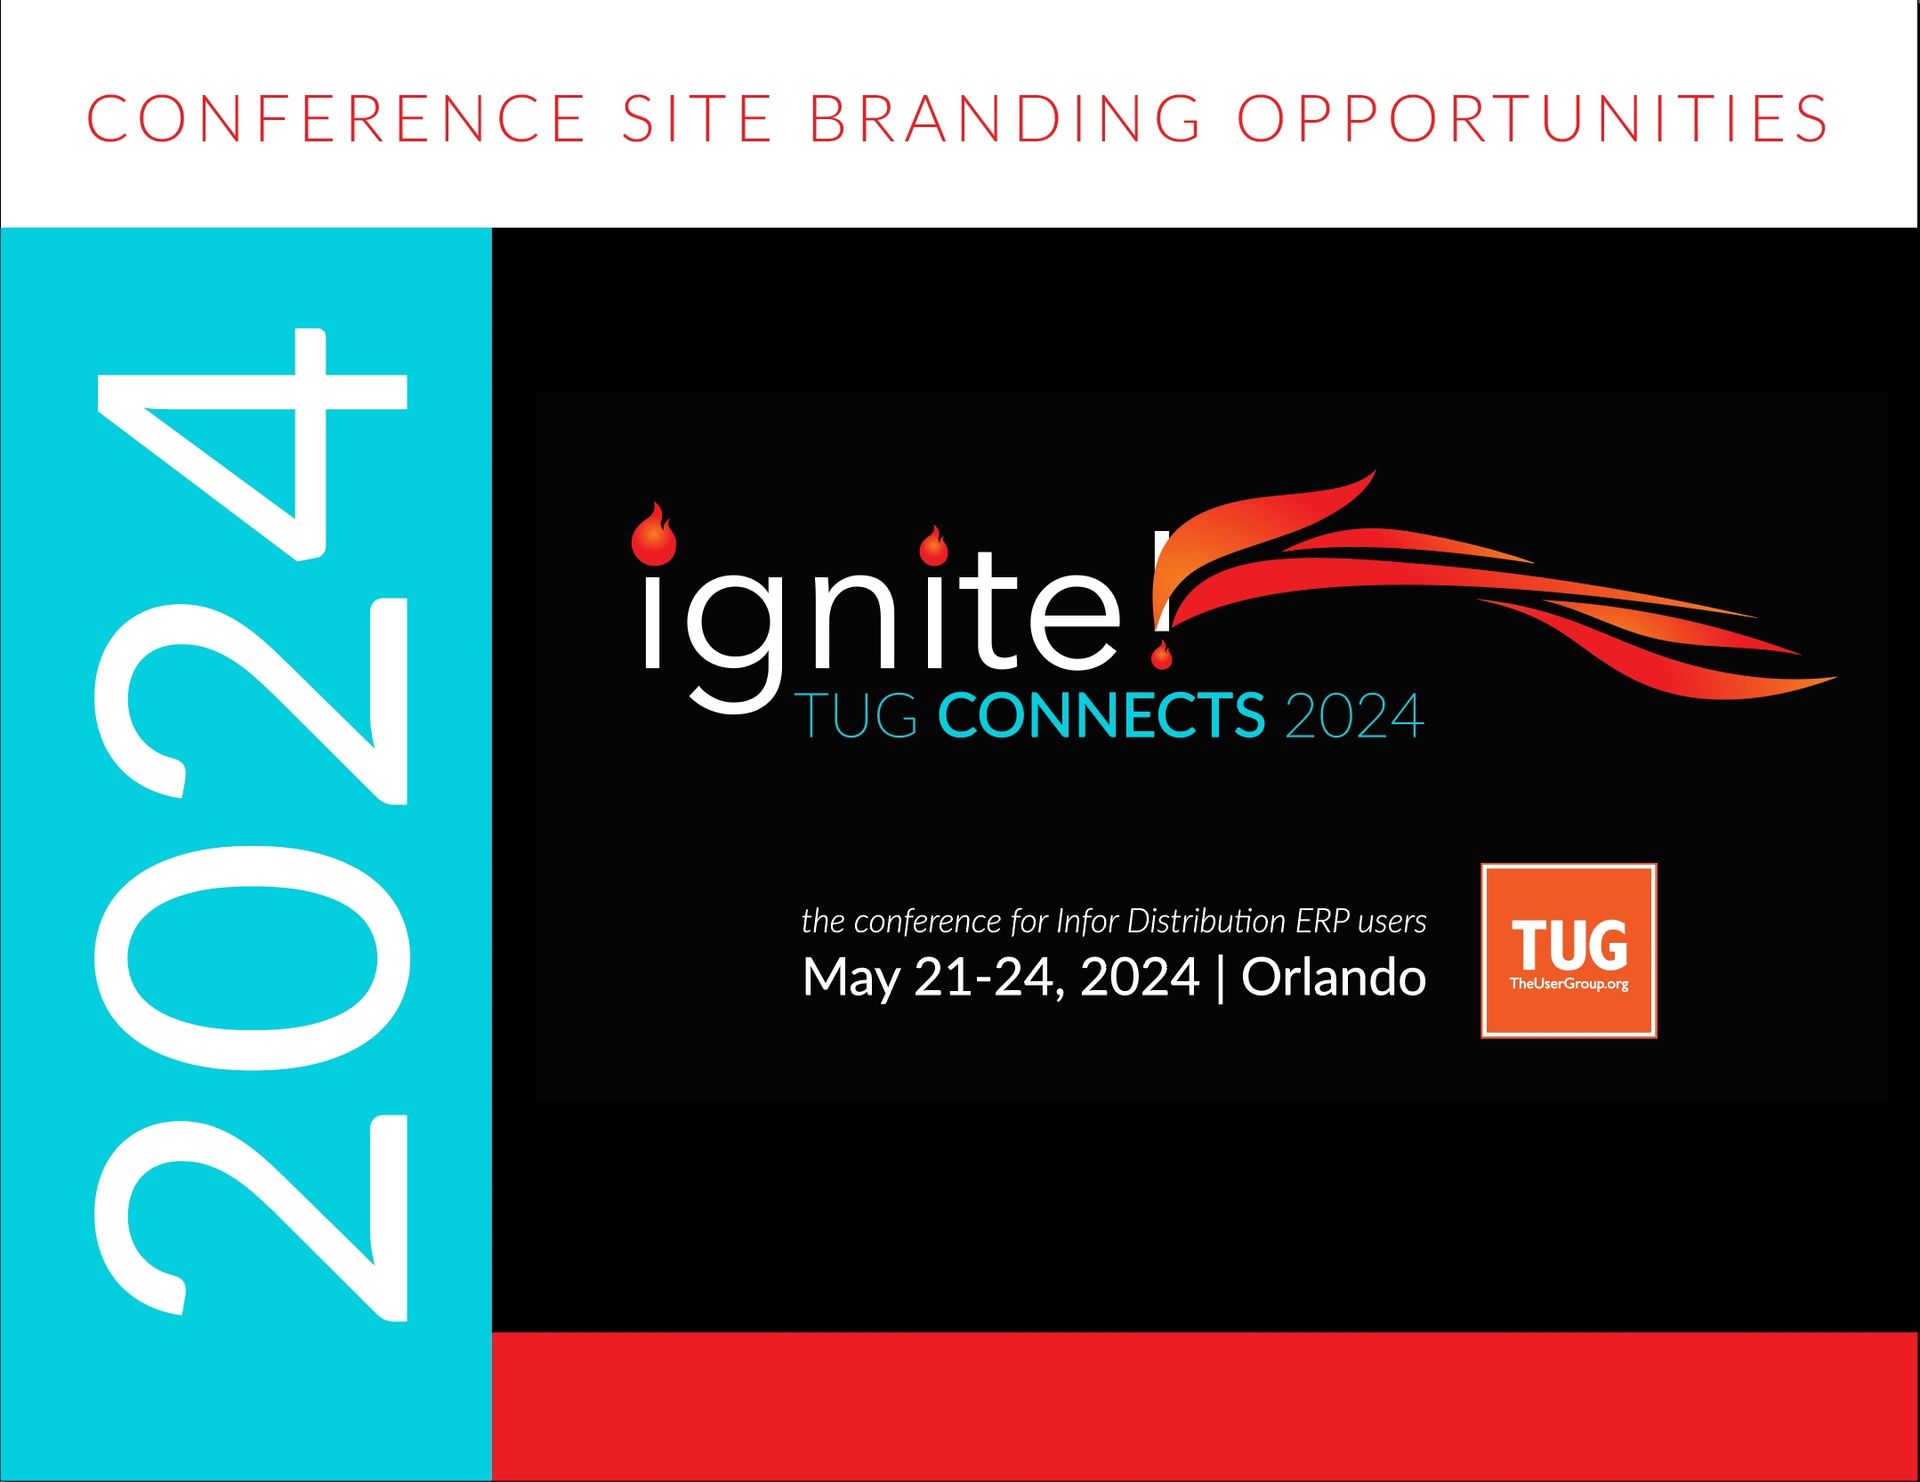 Conference site branding opportunities for TUG Connects 2024 ignite